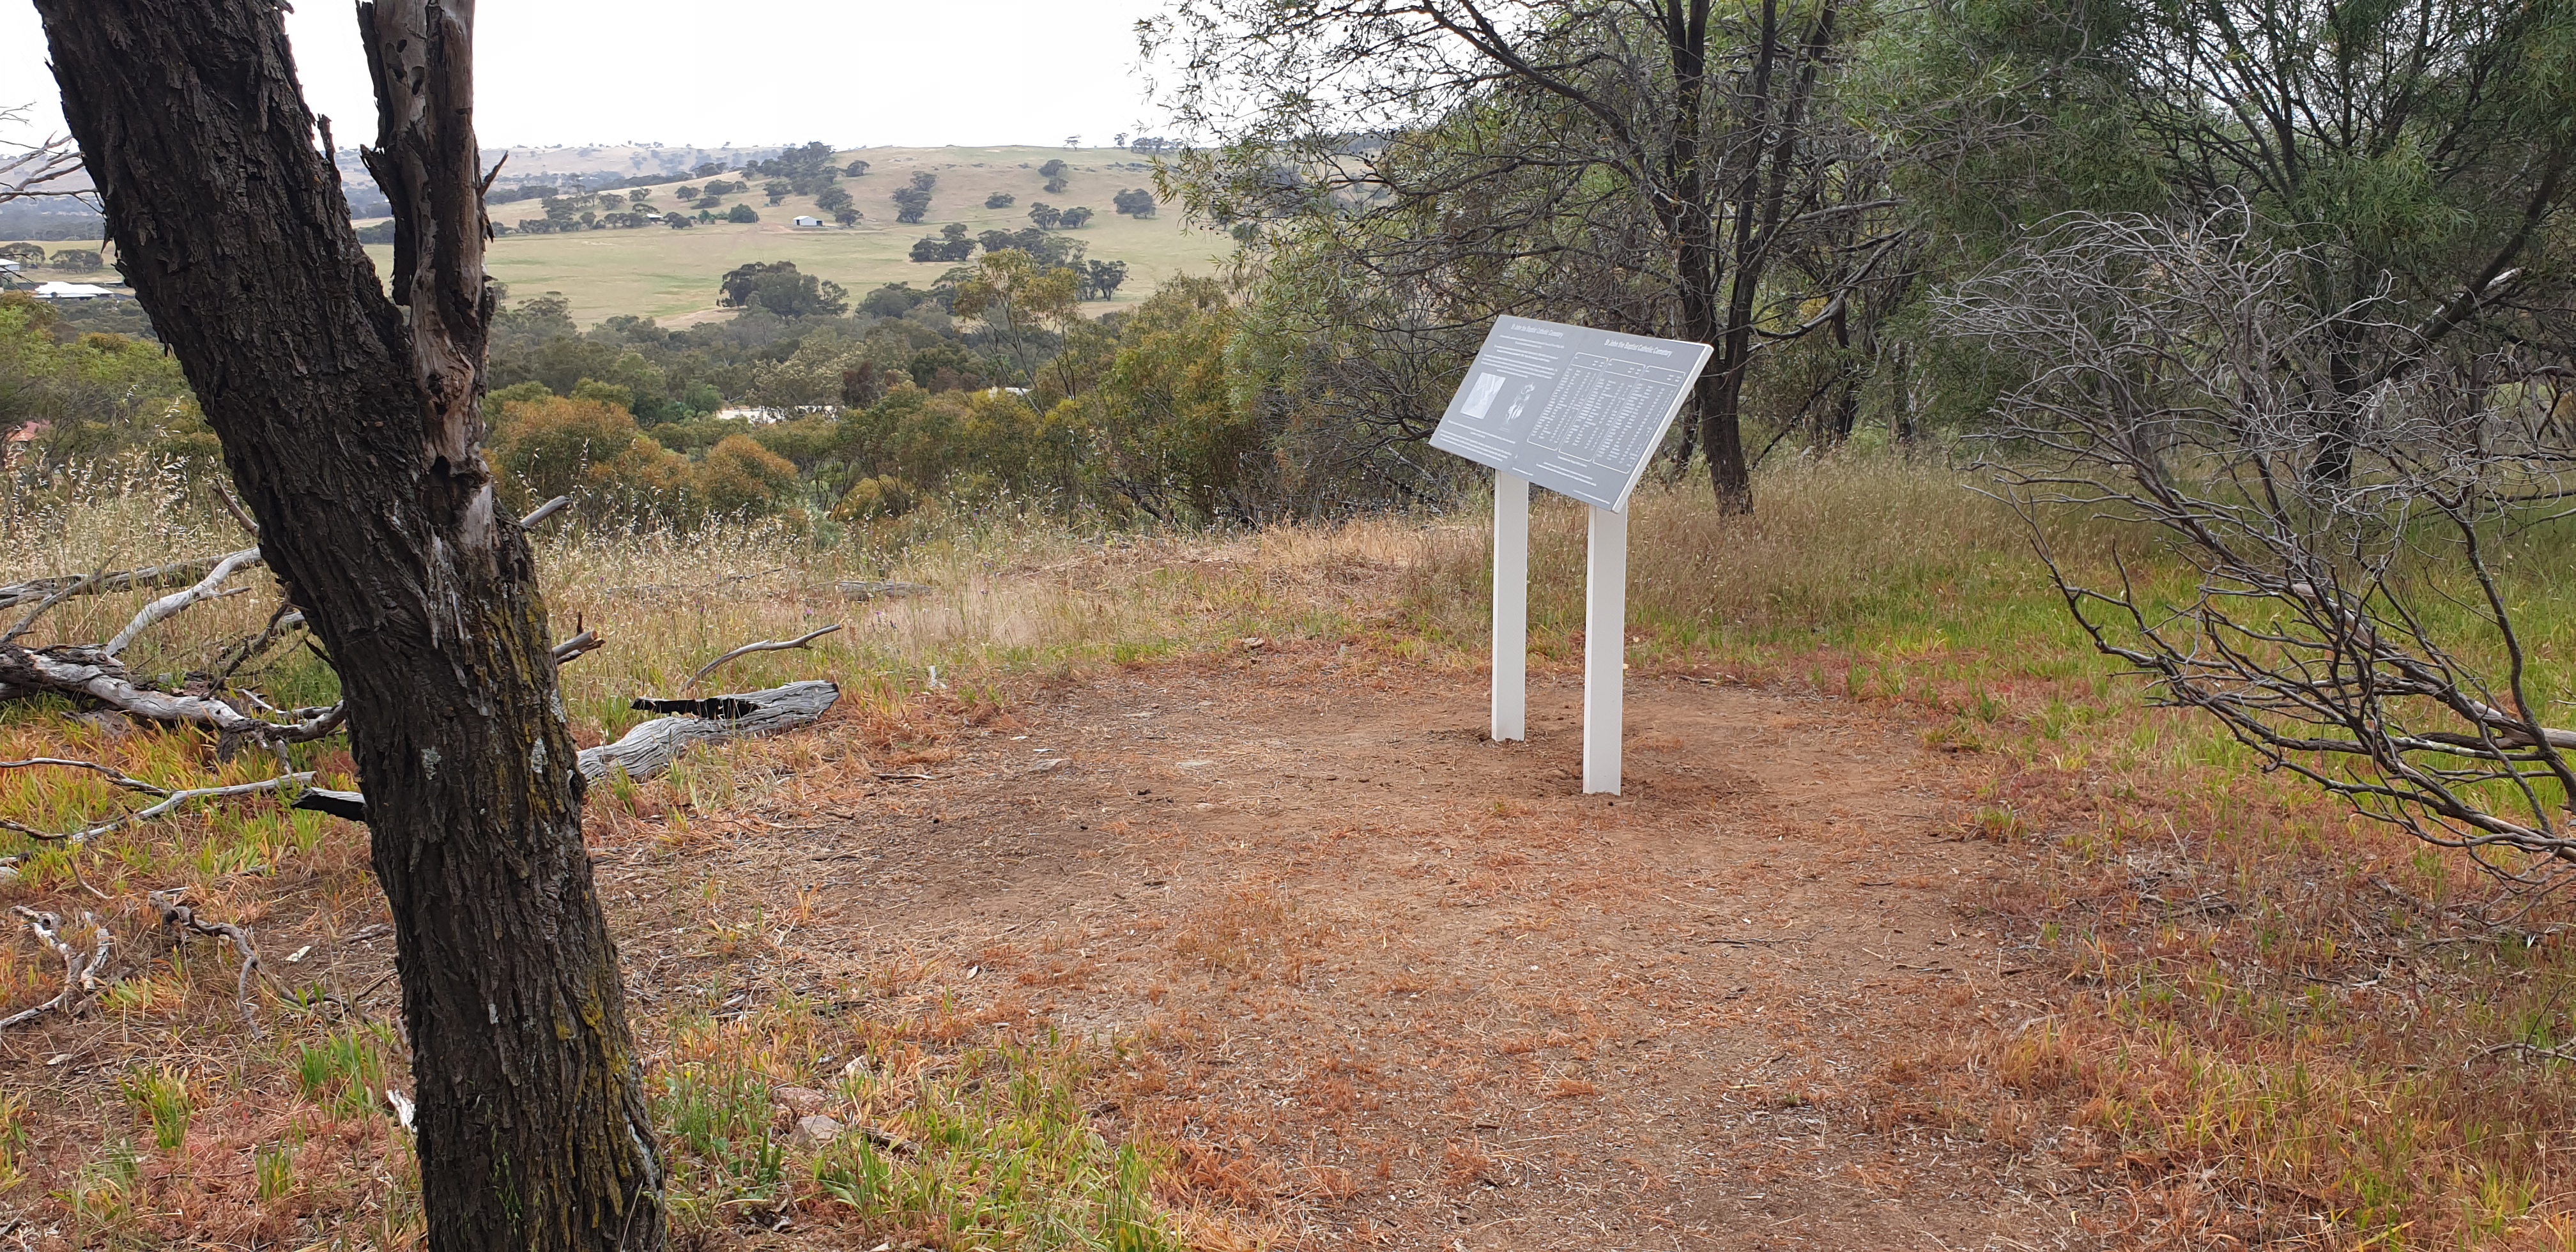 This is a photograph of the Toodyay Catholic Cemetery sign in situ